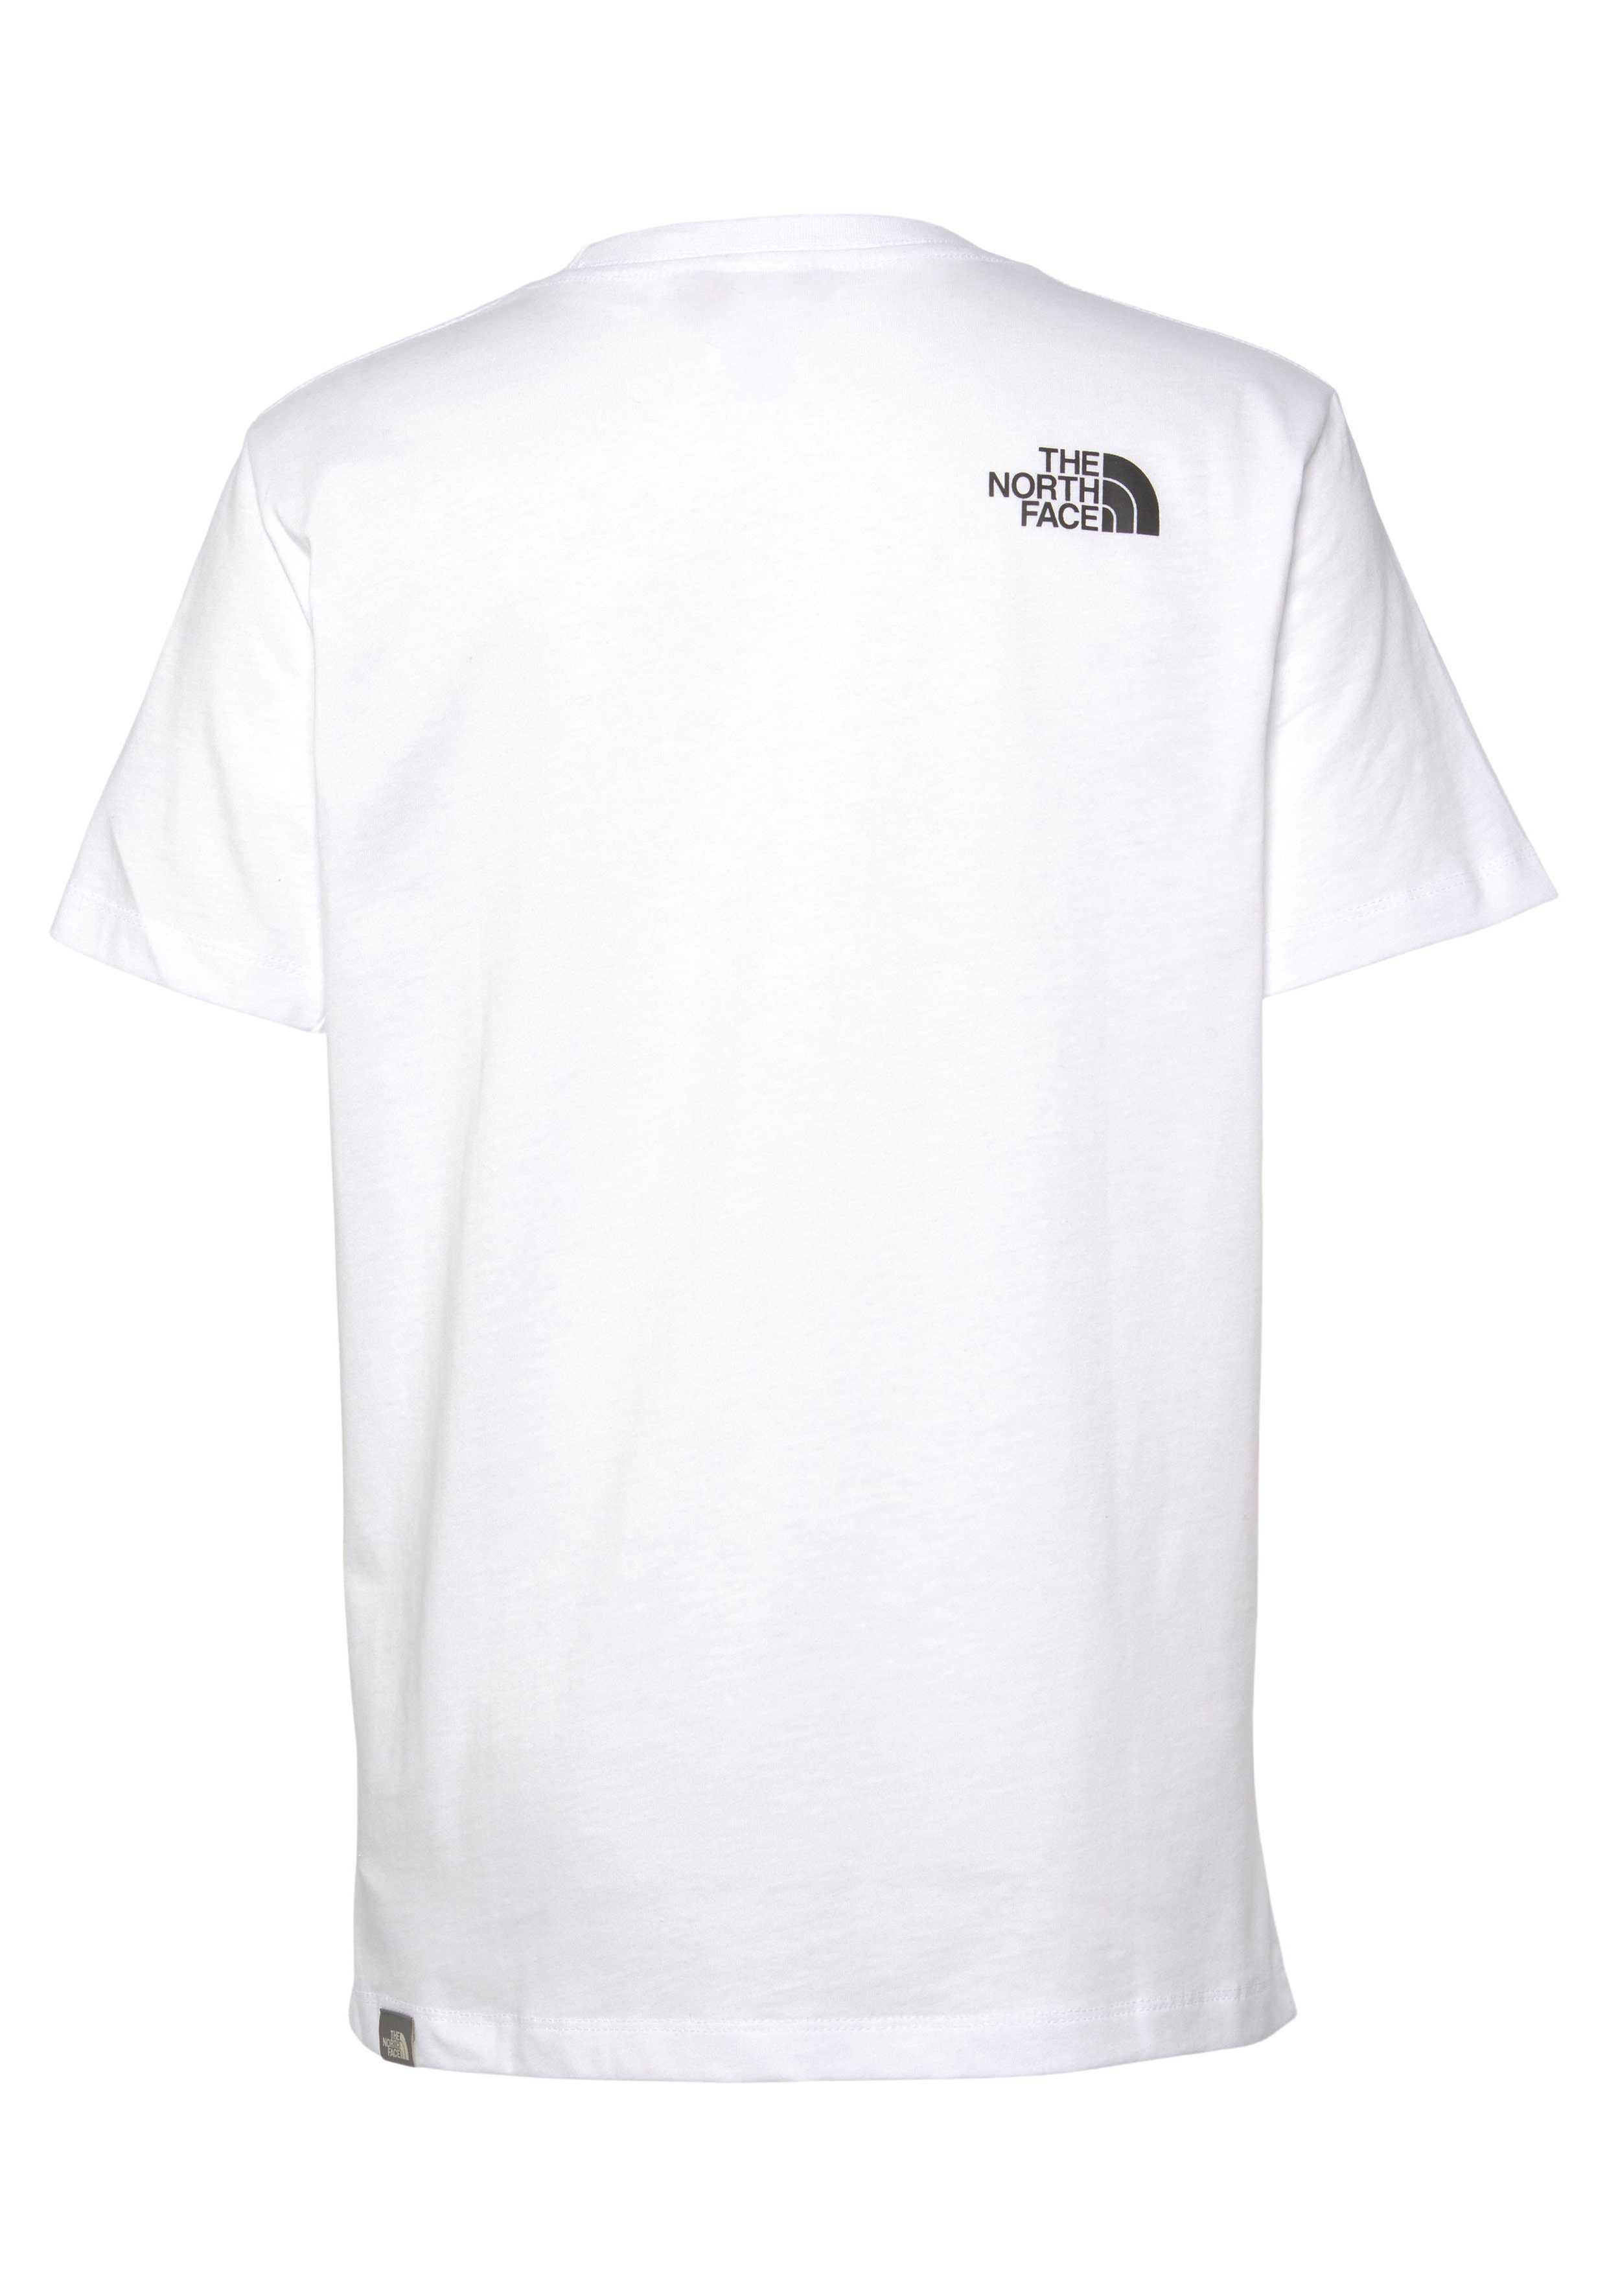 TEE white T-Shirt EASY für Face Kinder North The -